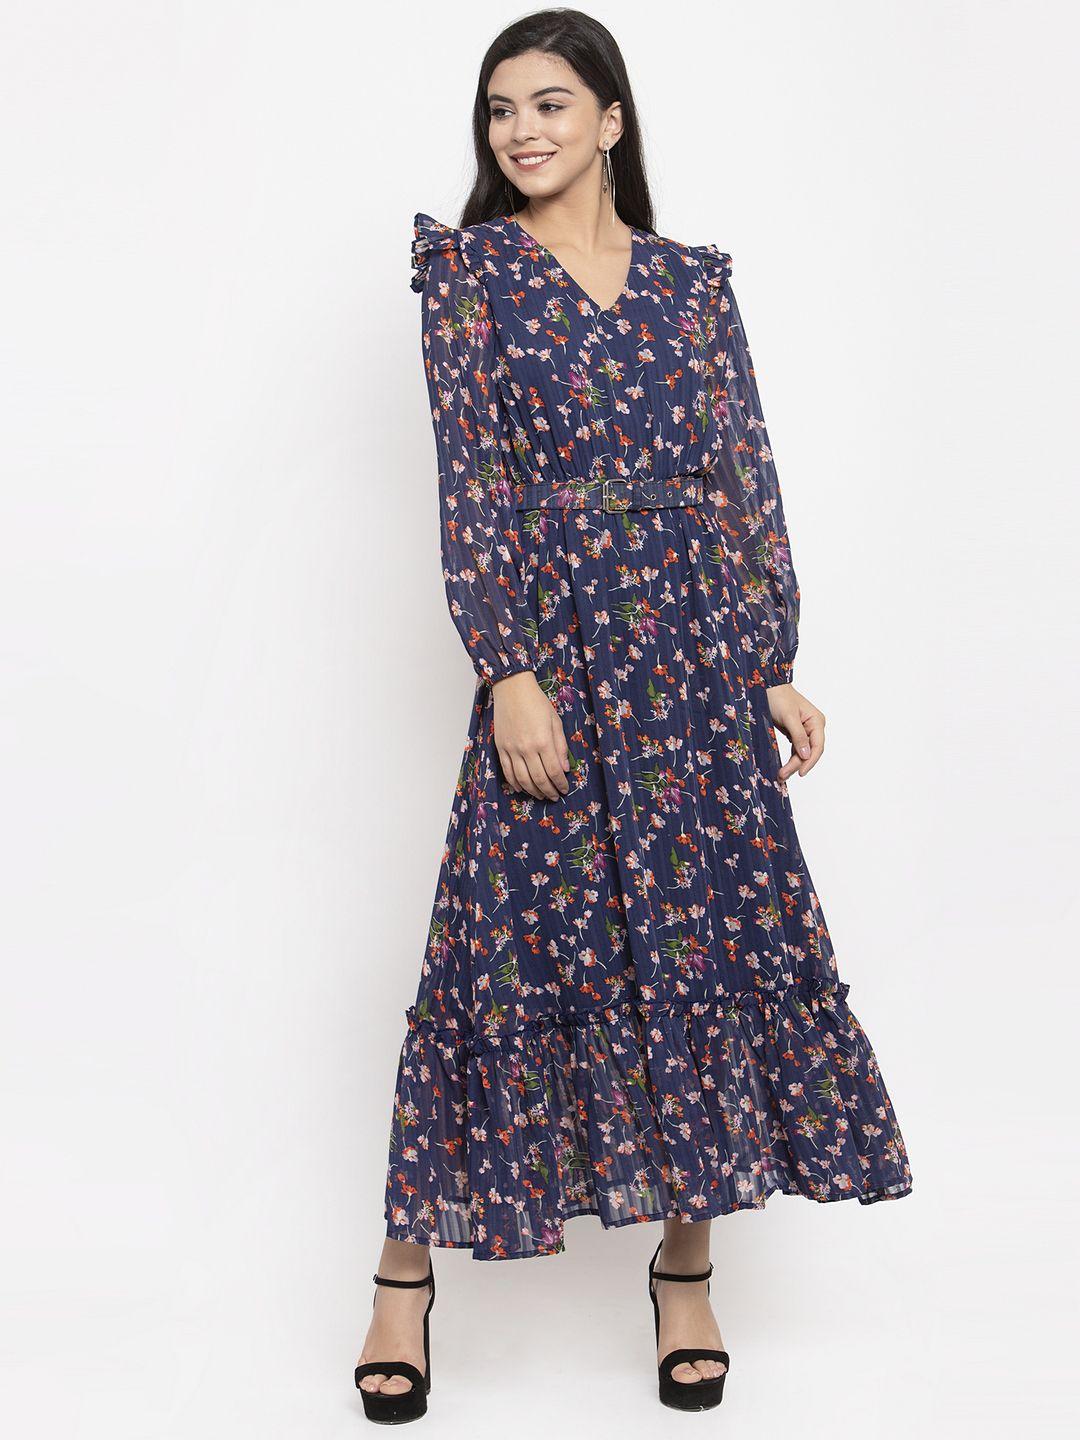 kassually women blue floral printed maxi dress